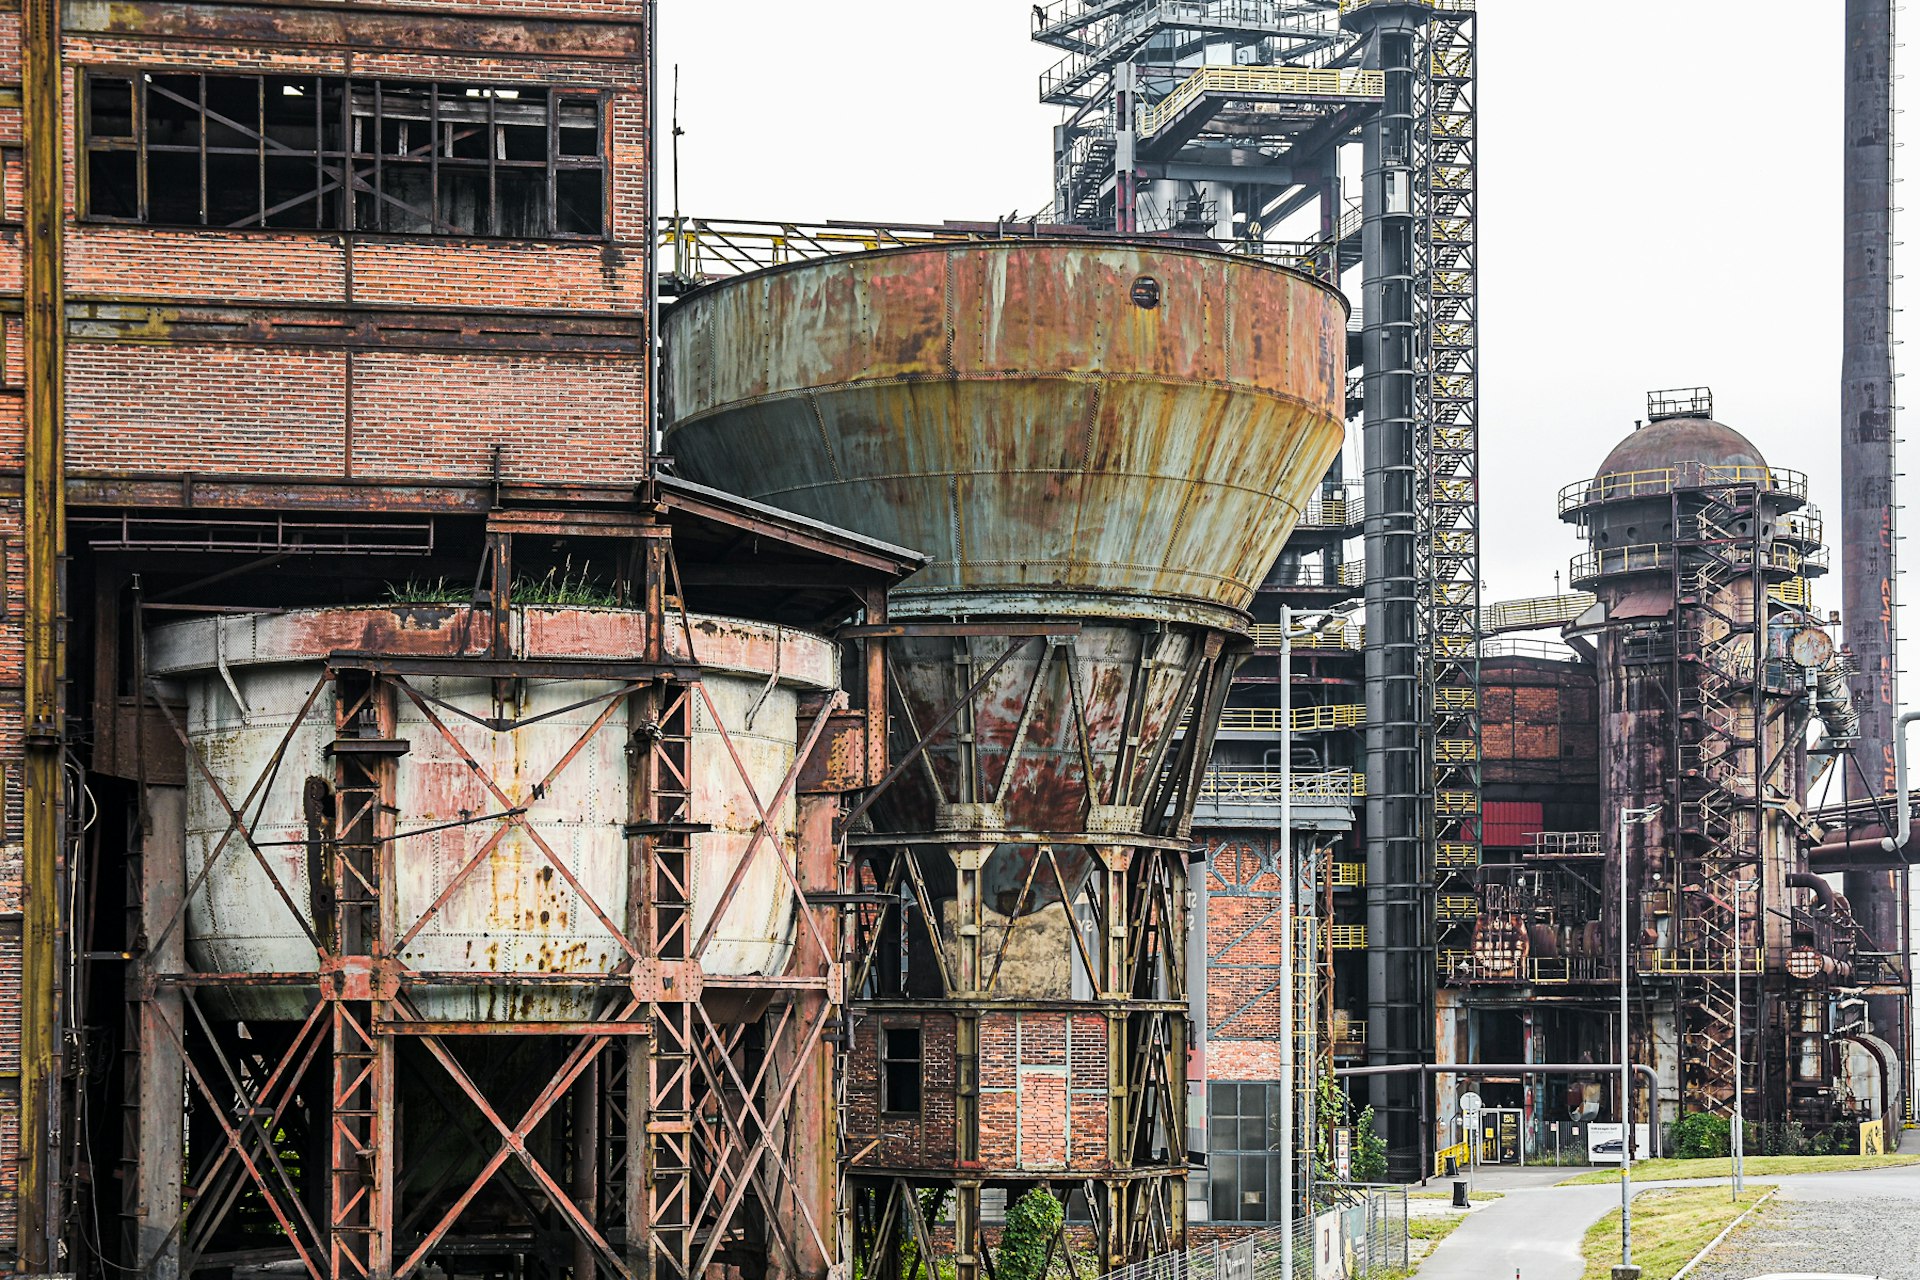 Industrial architecture covered in red-rust and clearly abandoned, including silos, warehouses and towers